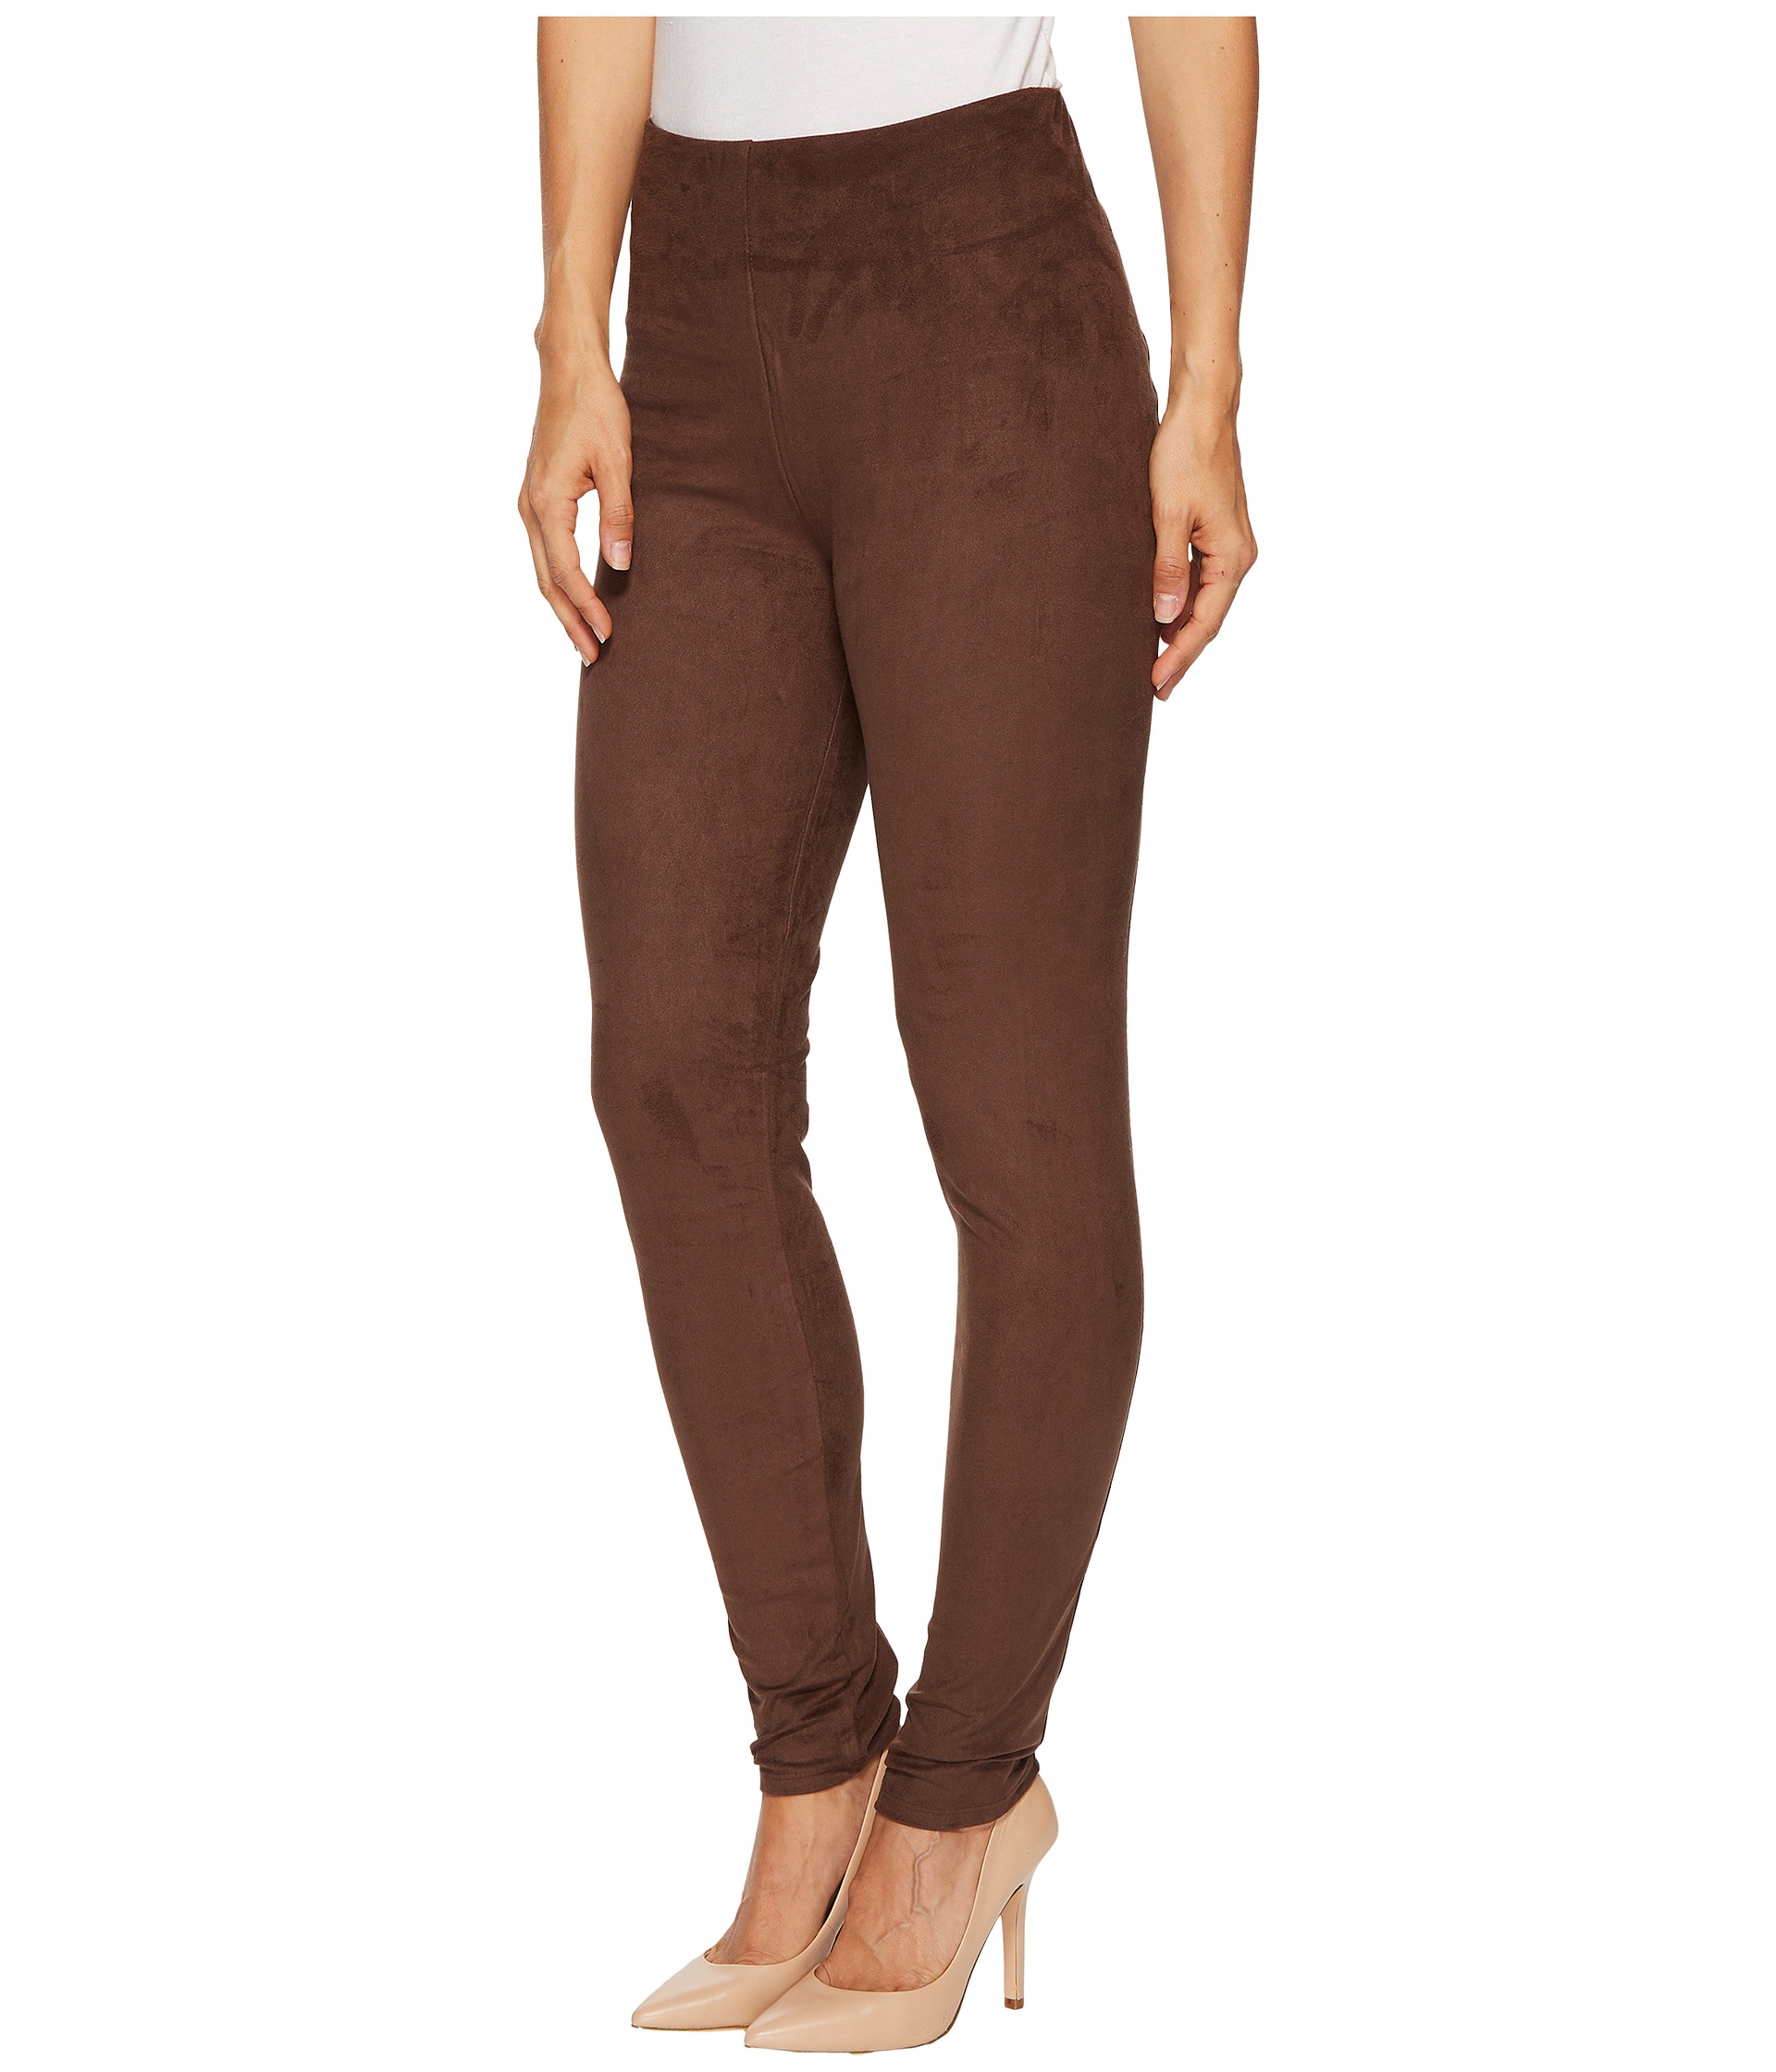 Lysse High-Waist Faux Suede Leggings at Zappos.com